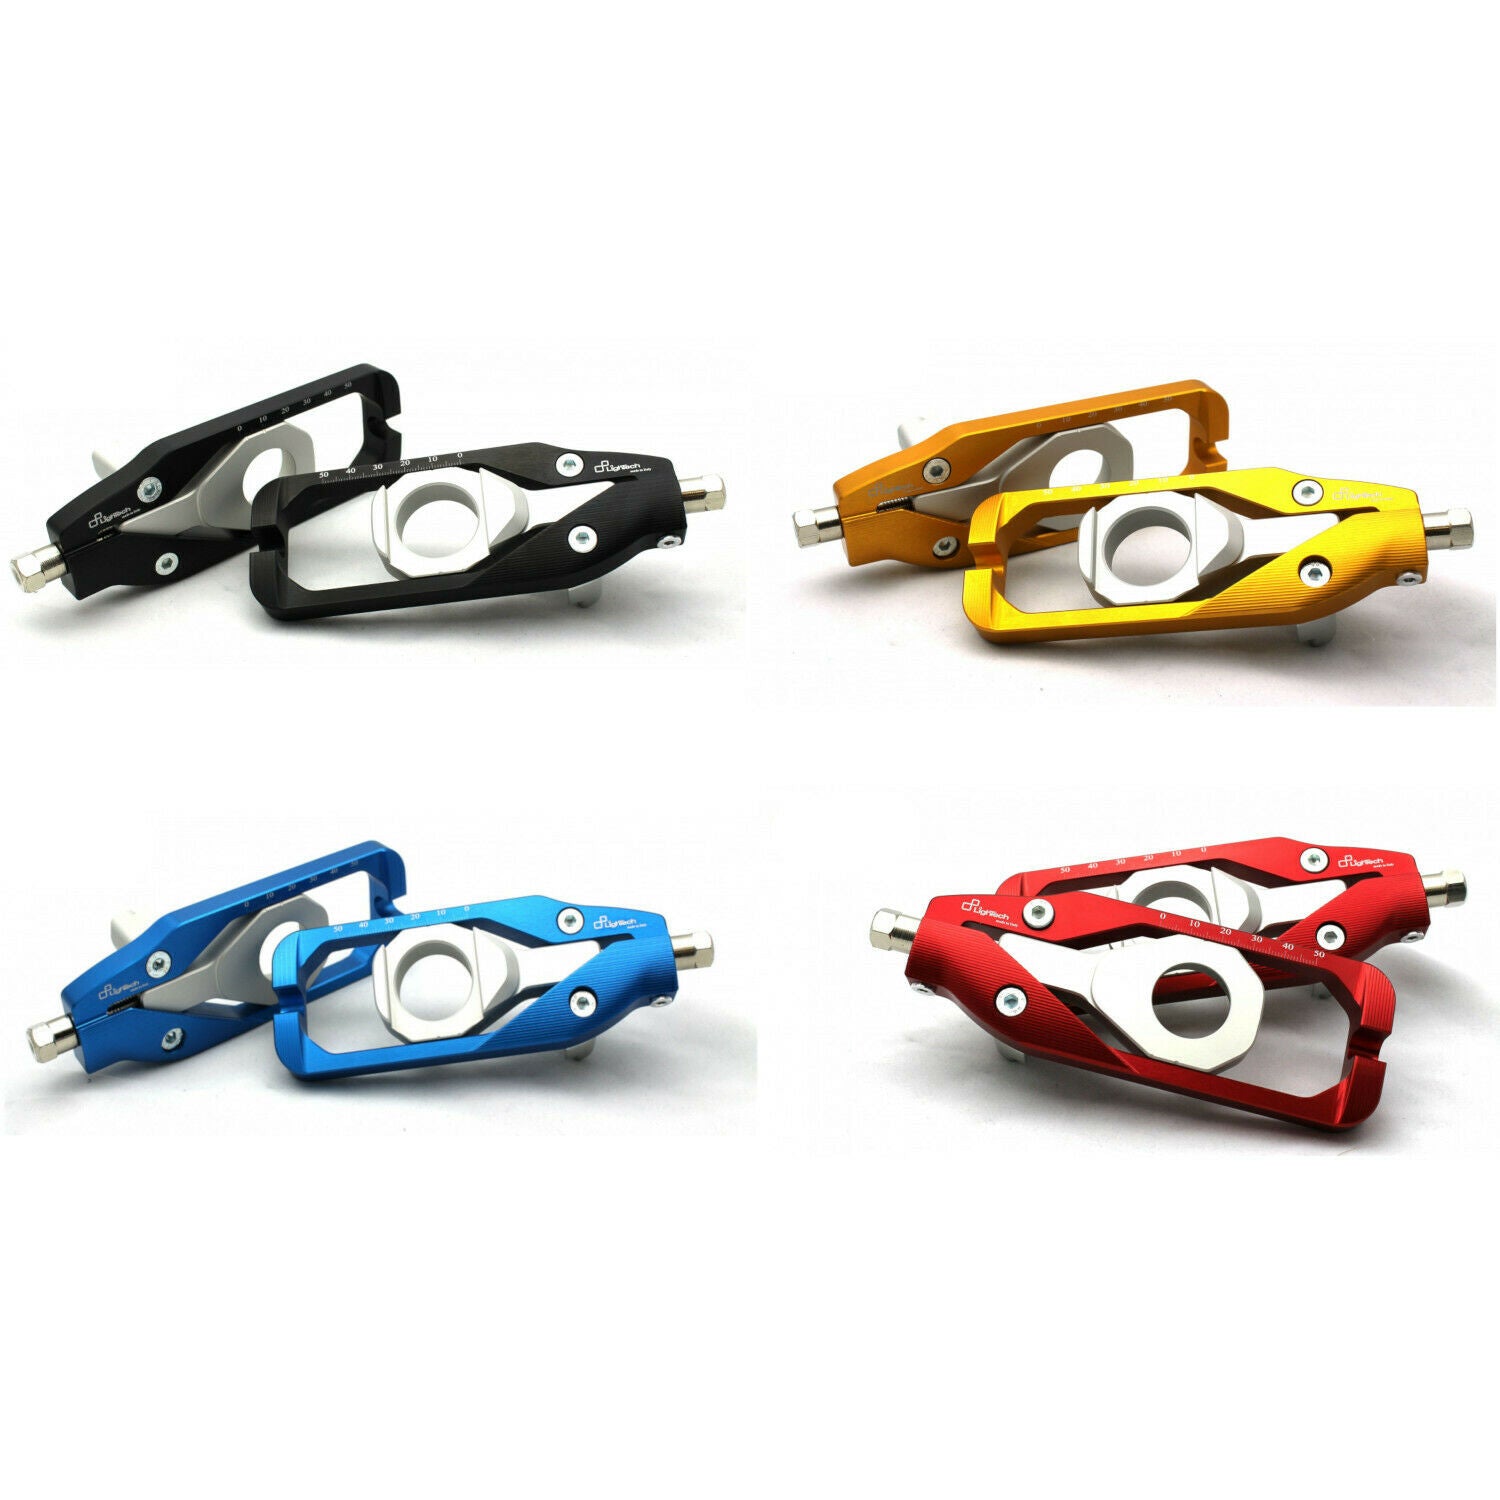 Lightech 2009 - 2014 Yamaha YZF-R1 Tensioner Chain Adjusters (4 Colors)